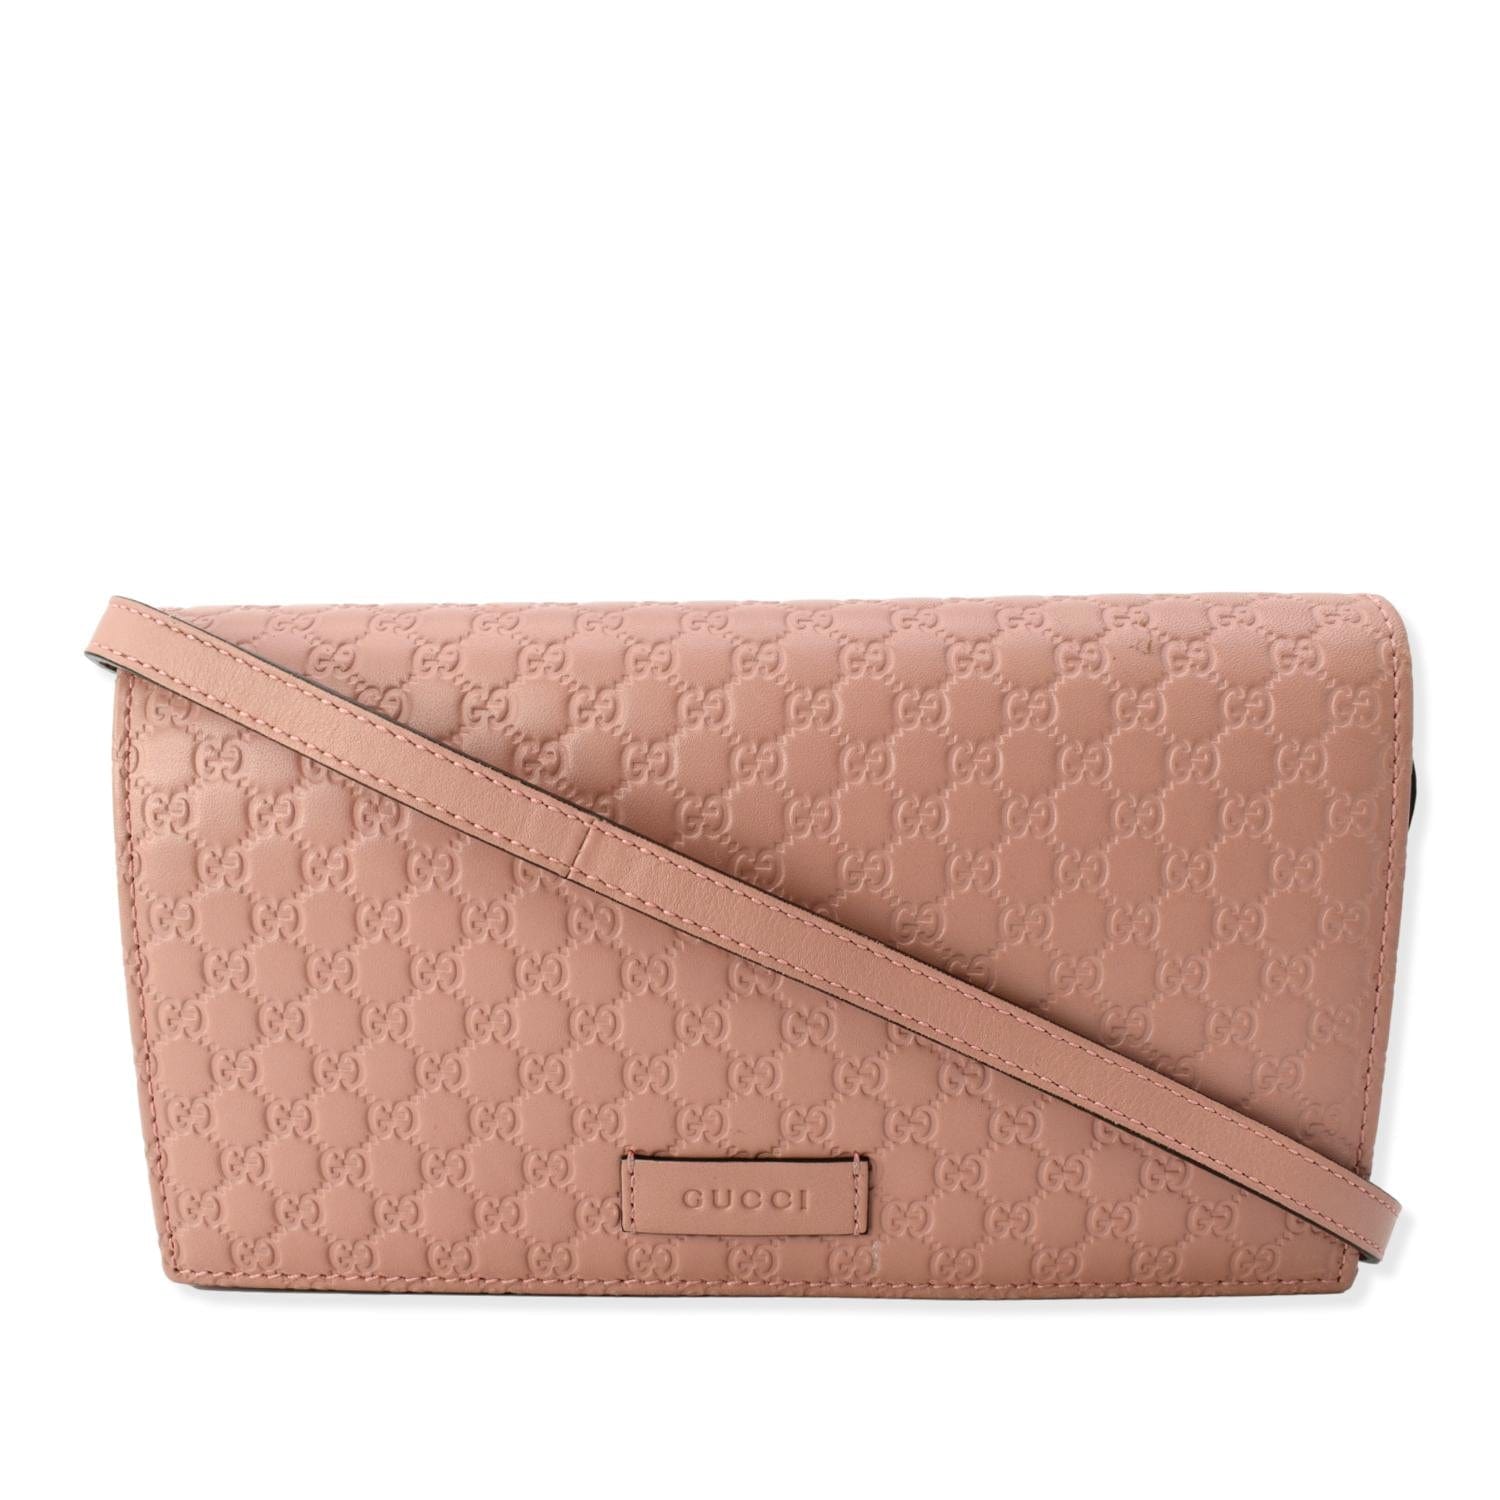 Gucci Micro GG Guccissima Leather Crossbody Wallet Pink